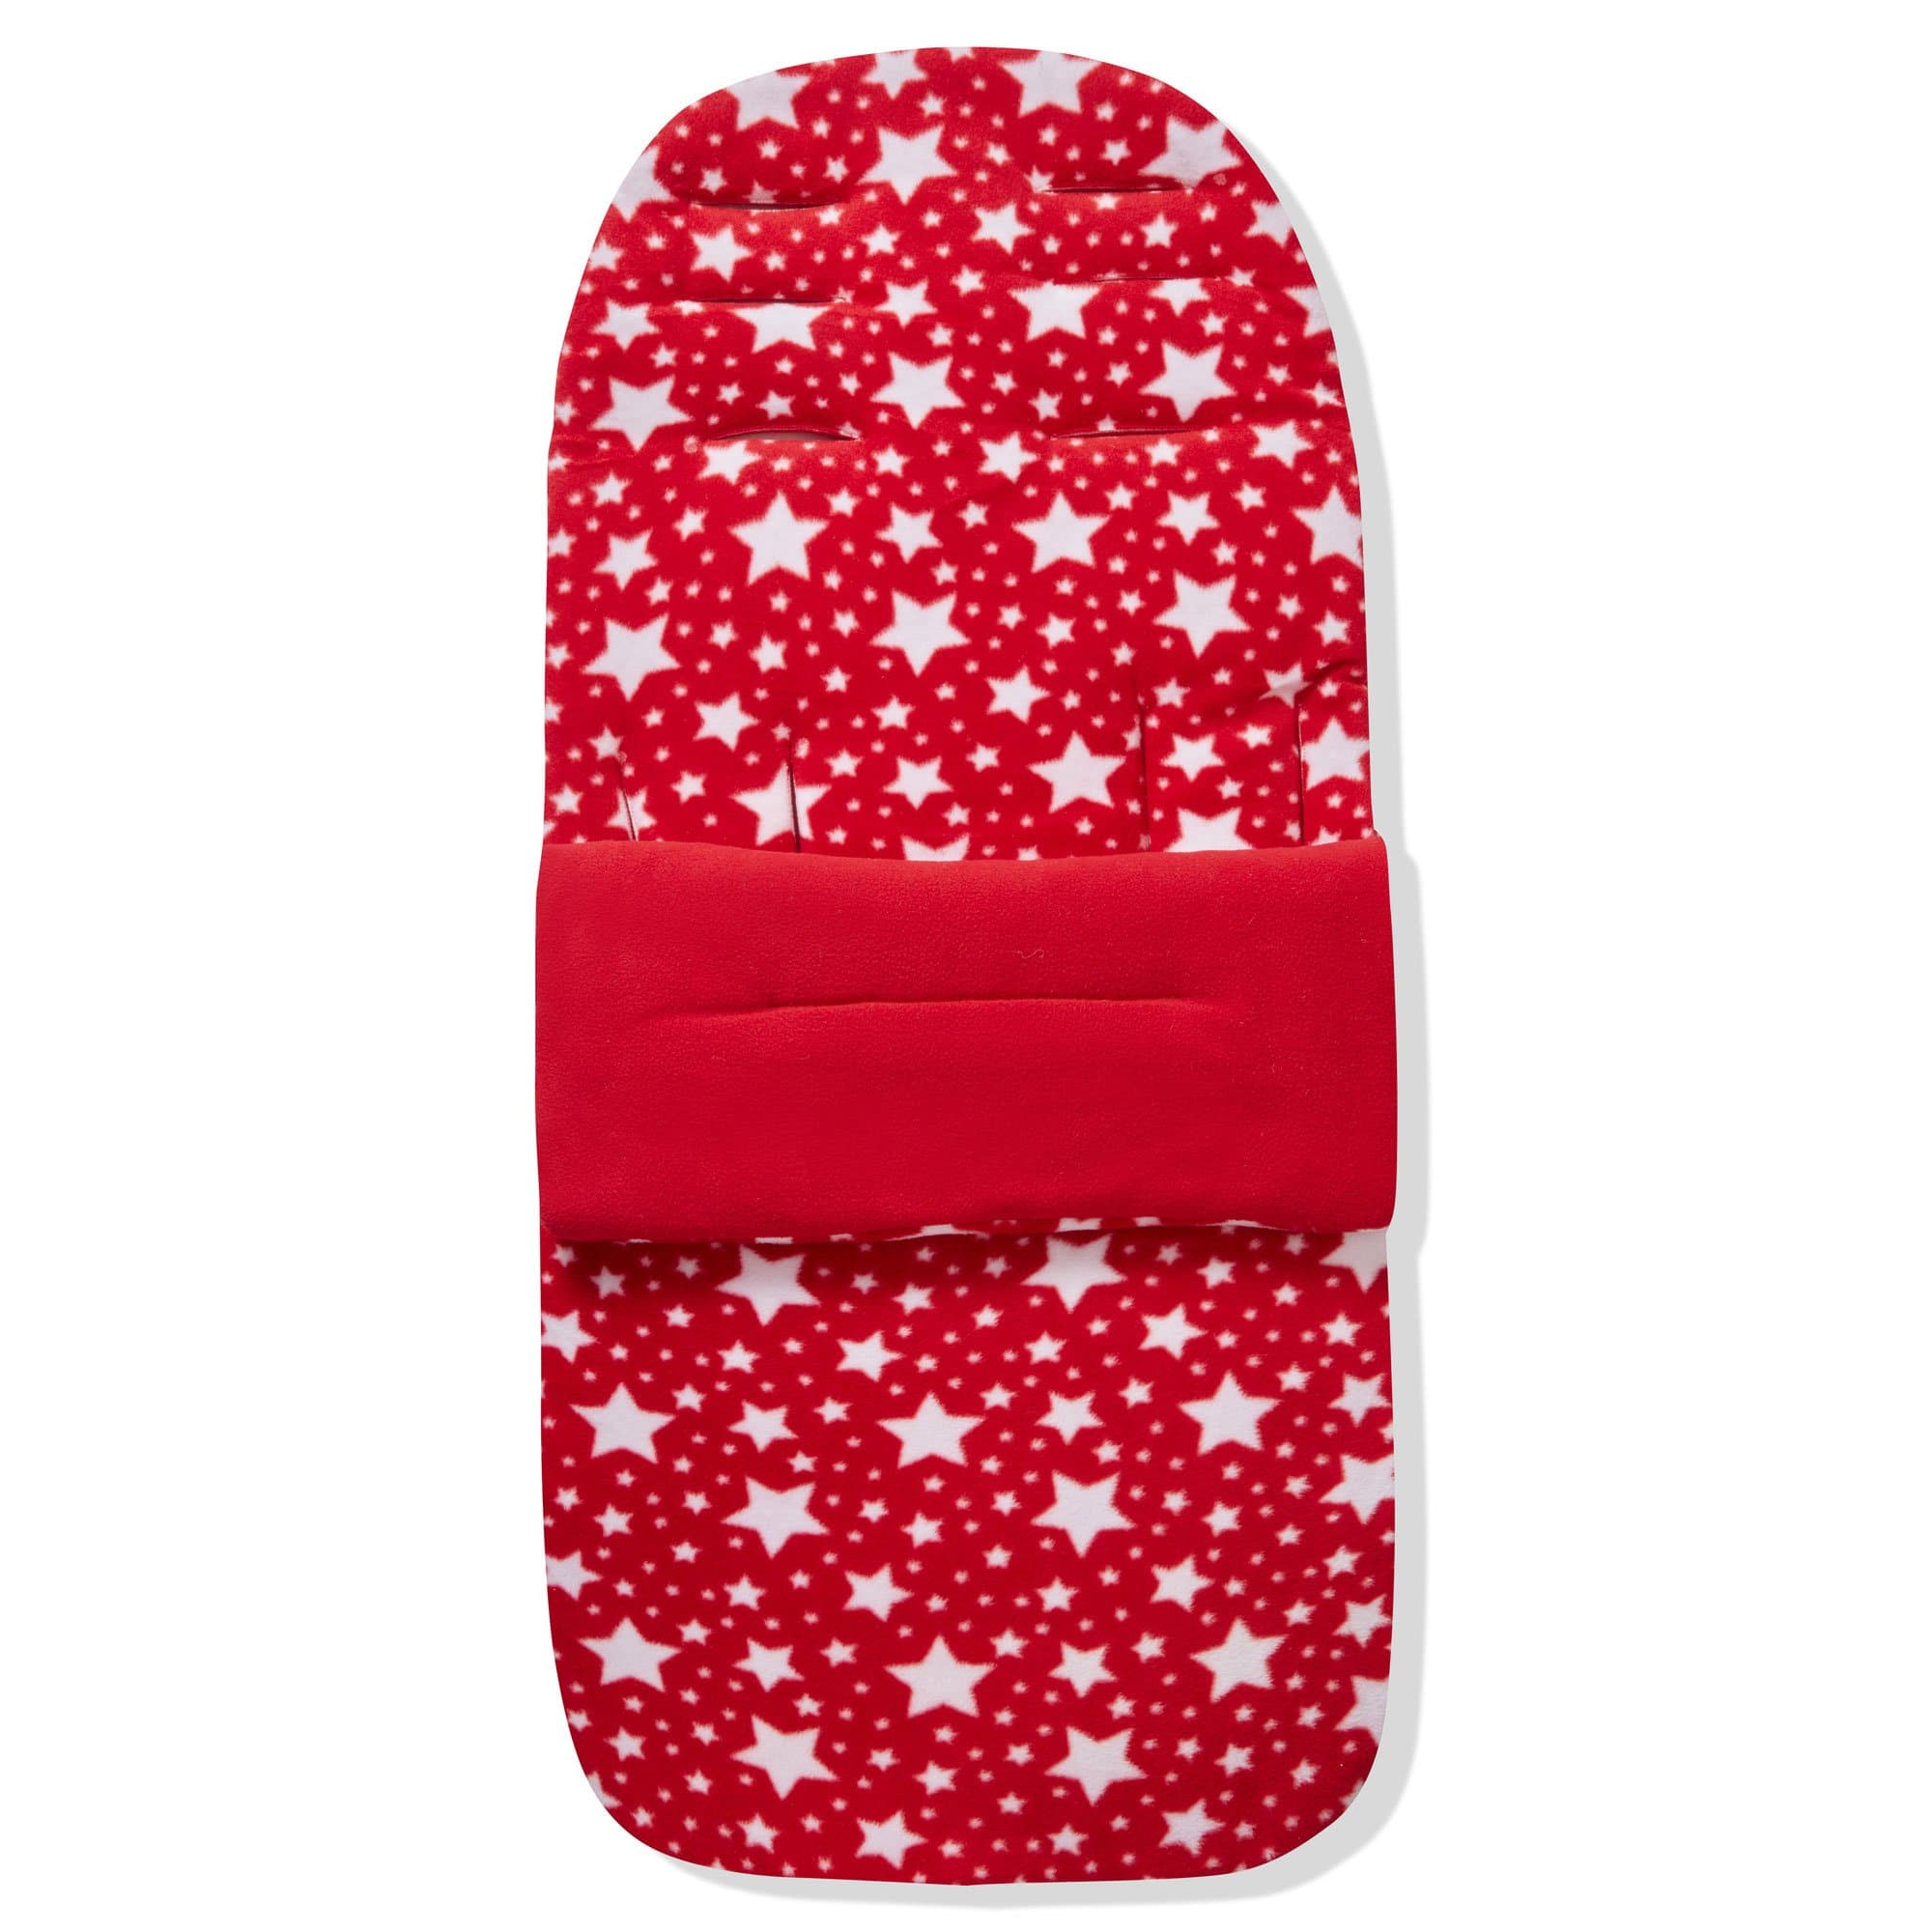 Fleece Footmuff / Cosy Toes Compatible With Baby Weavers - Red Star / Fits All Models | For Your Little One